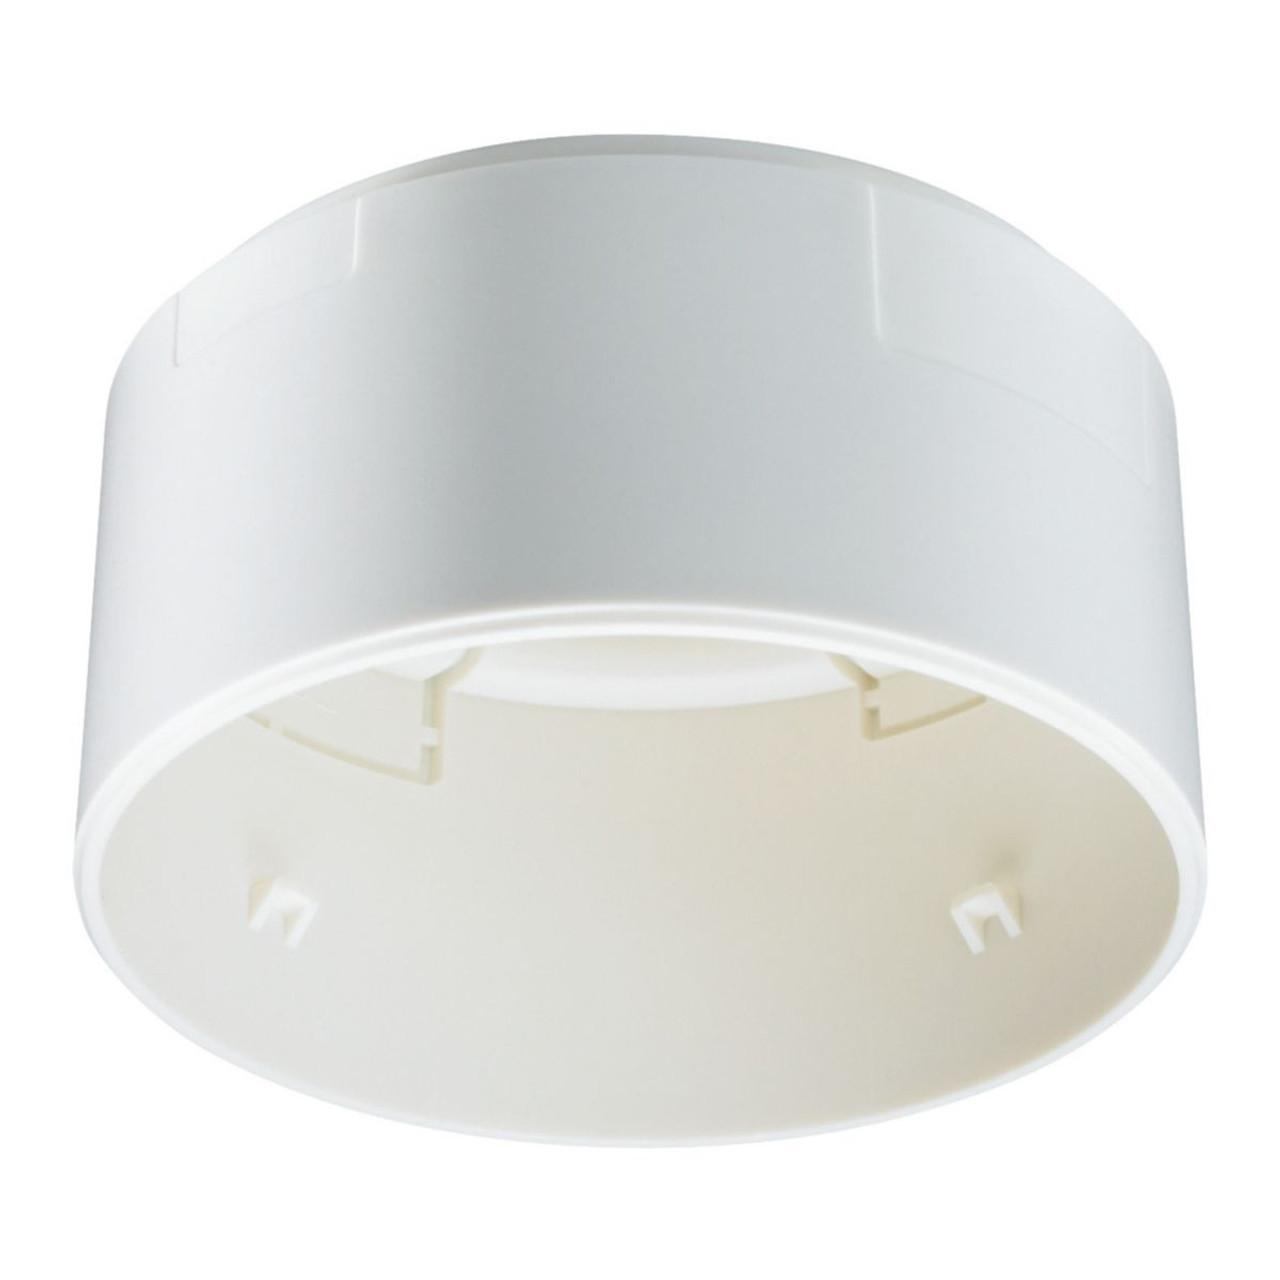 Philips Lighting LRH1070/00 SENSR SURFACE BOX Ceiling mounting box for the  OccuSwtich LRM1070/1080 Installer